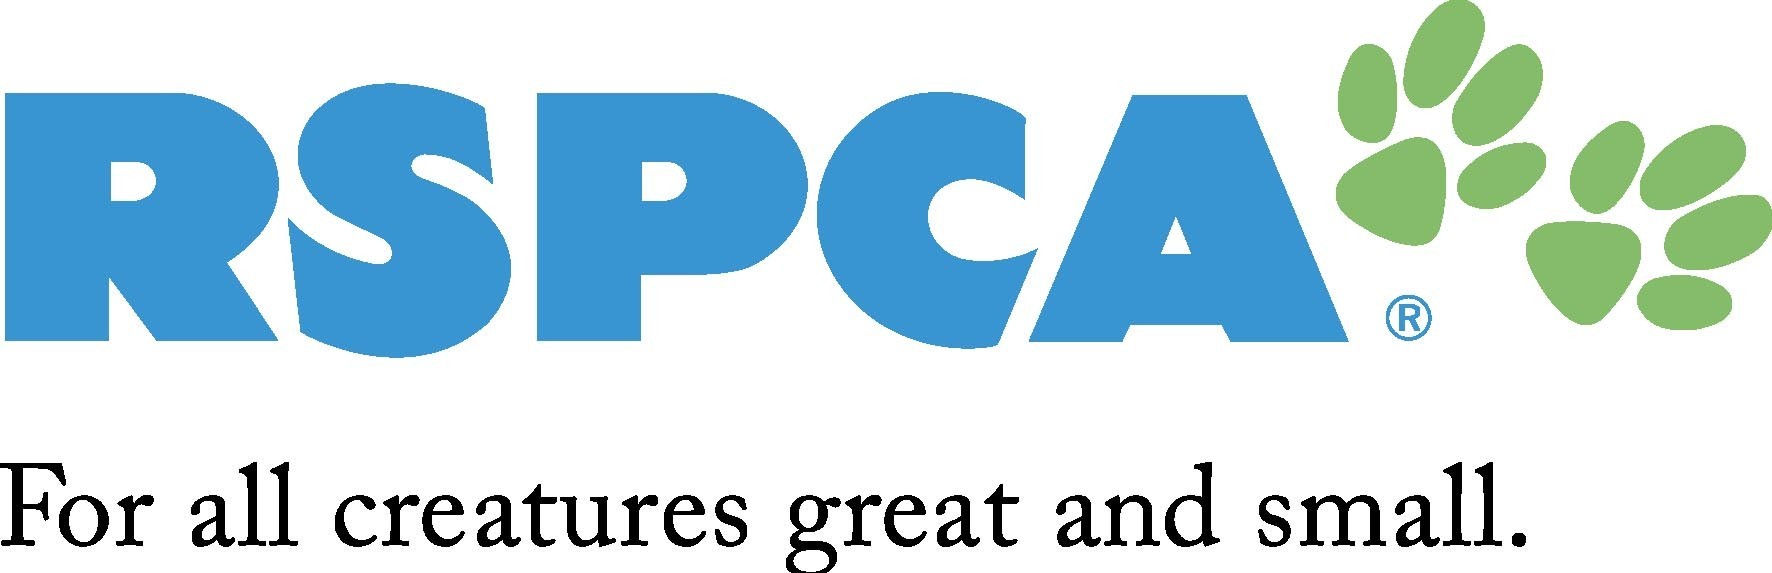 RSPCA Pets in Crisis